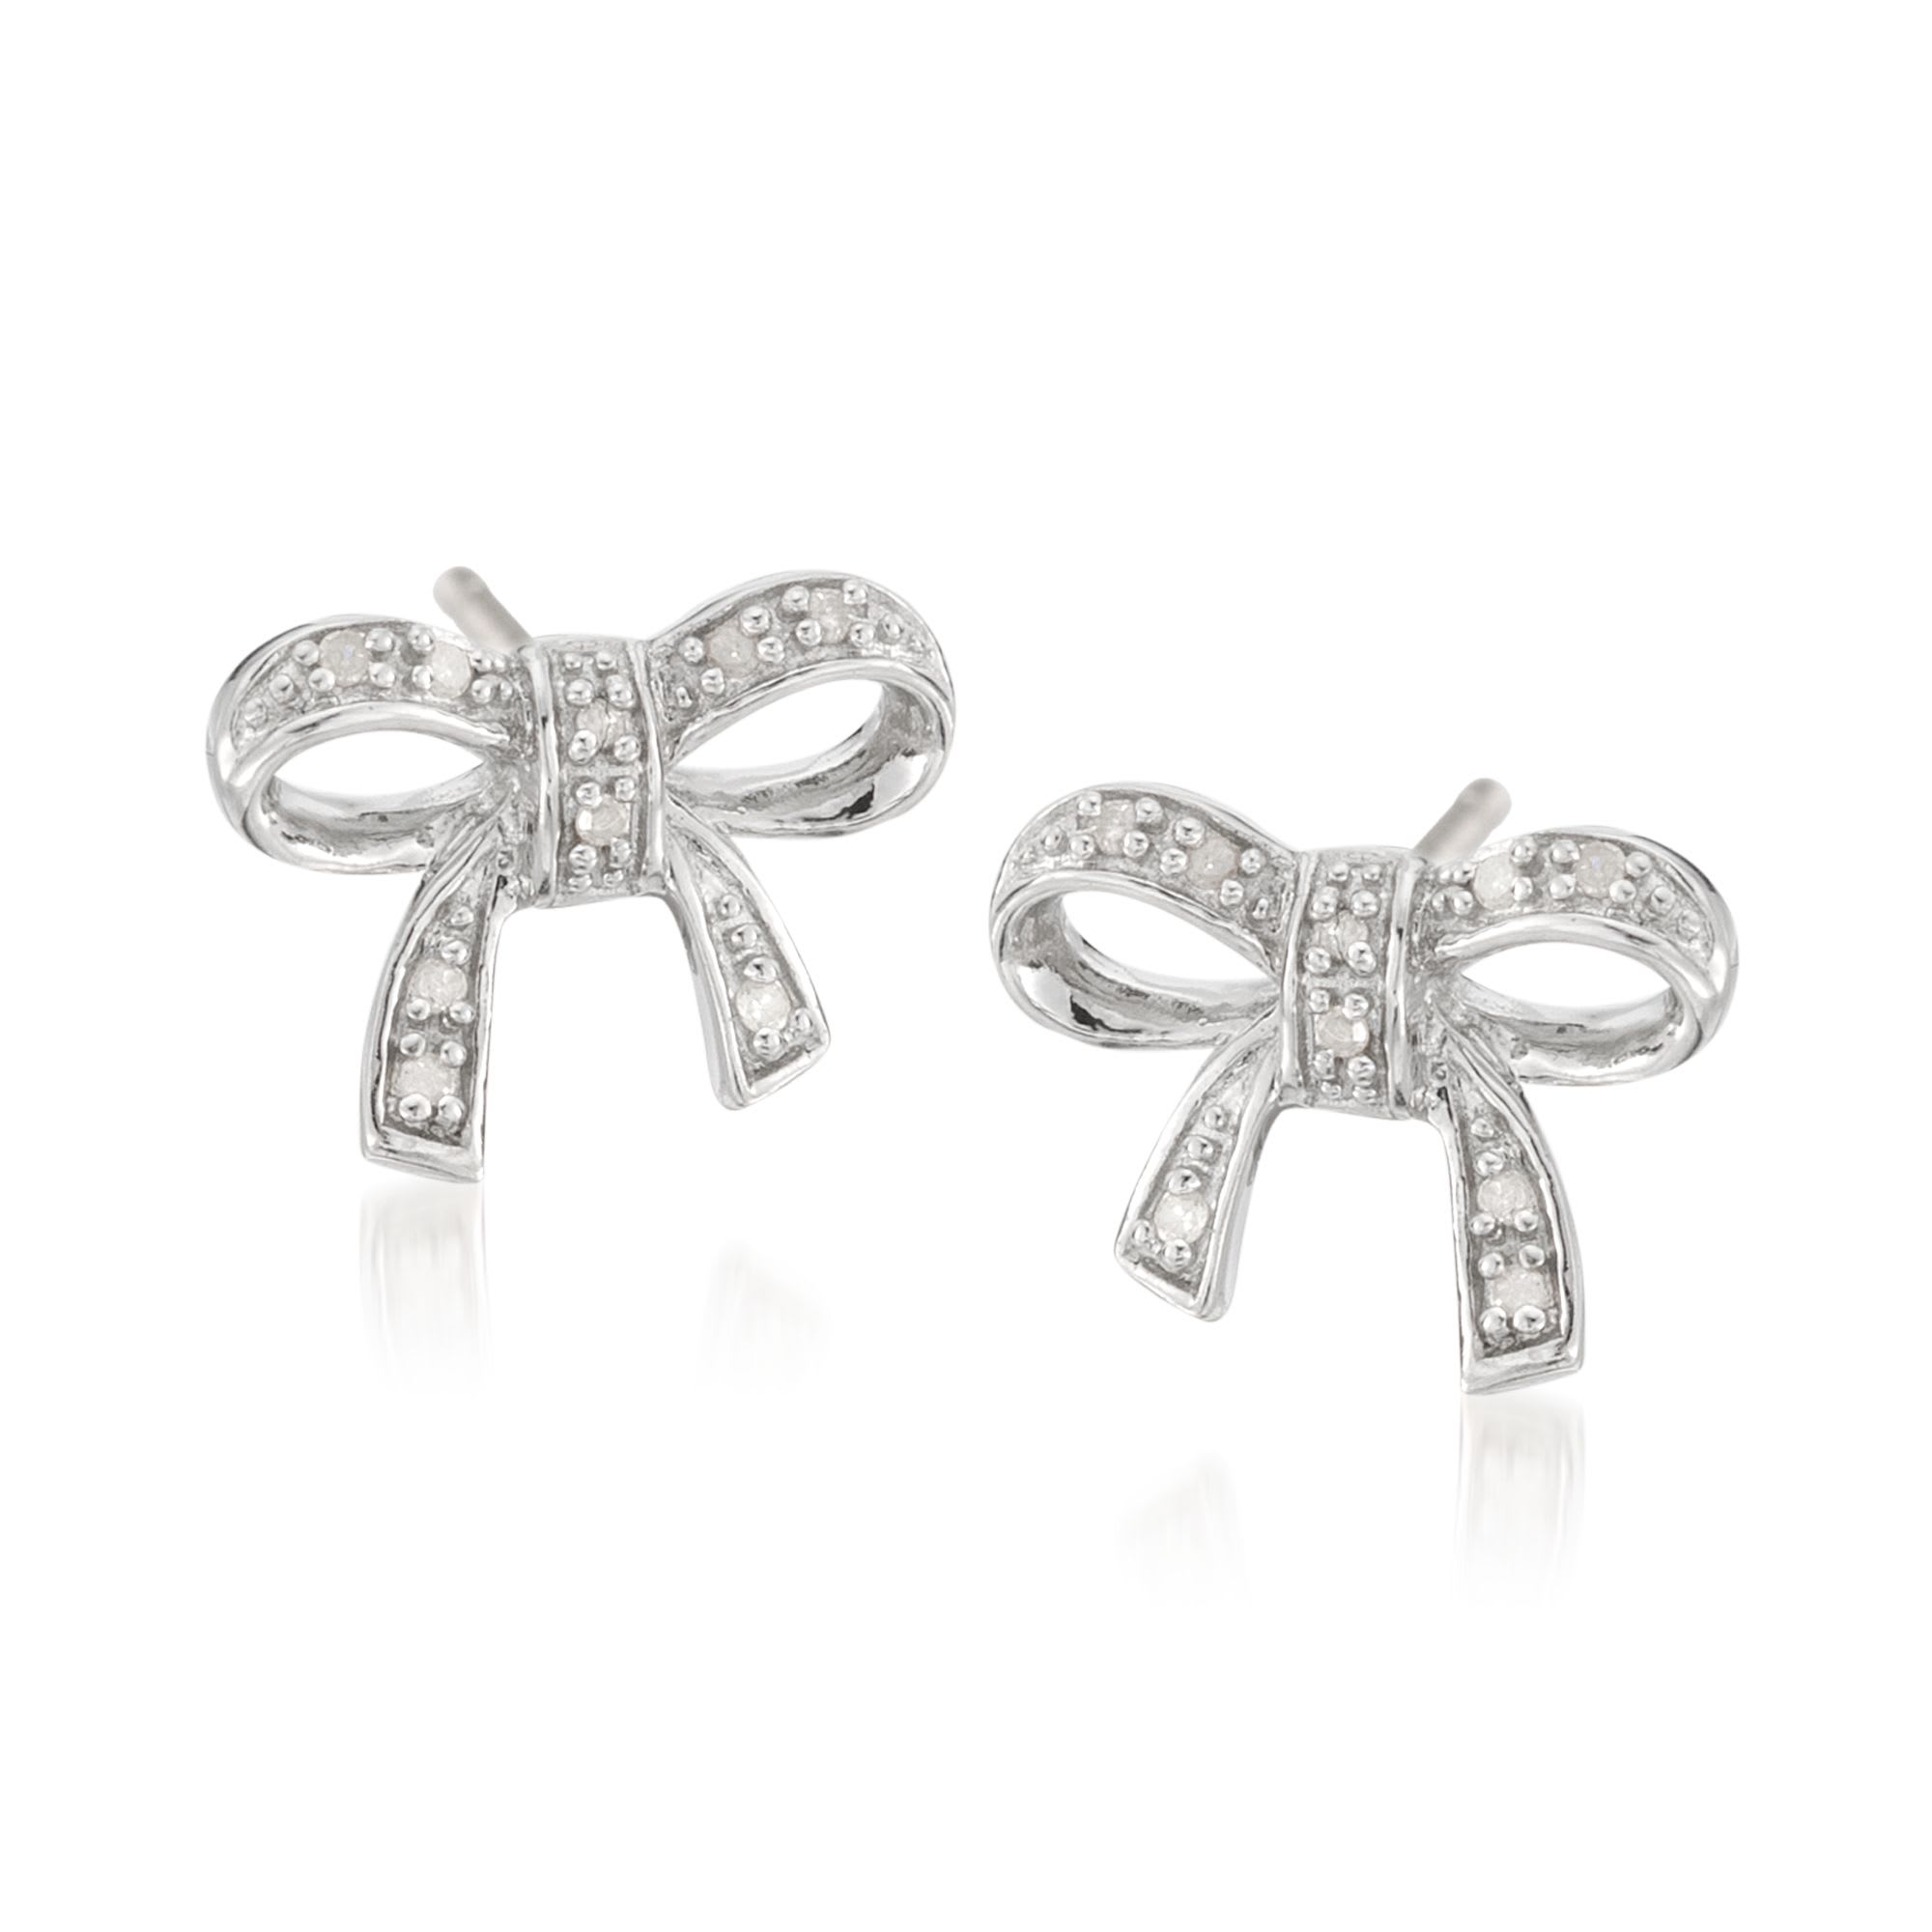 Sterling Silver Bow Earrings with Diamond Accents | Ross-Simons